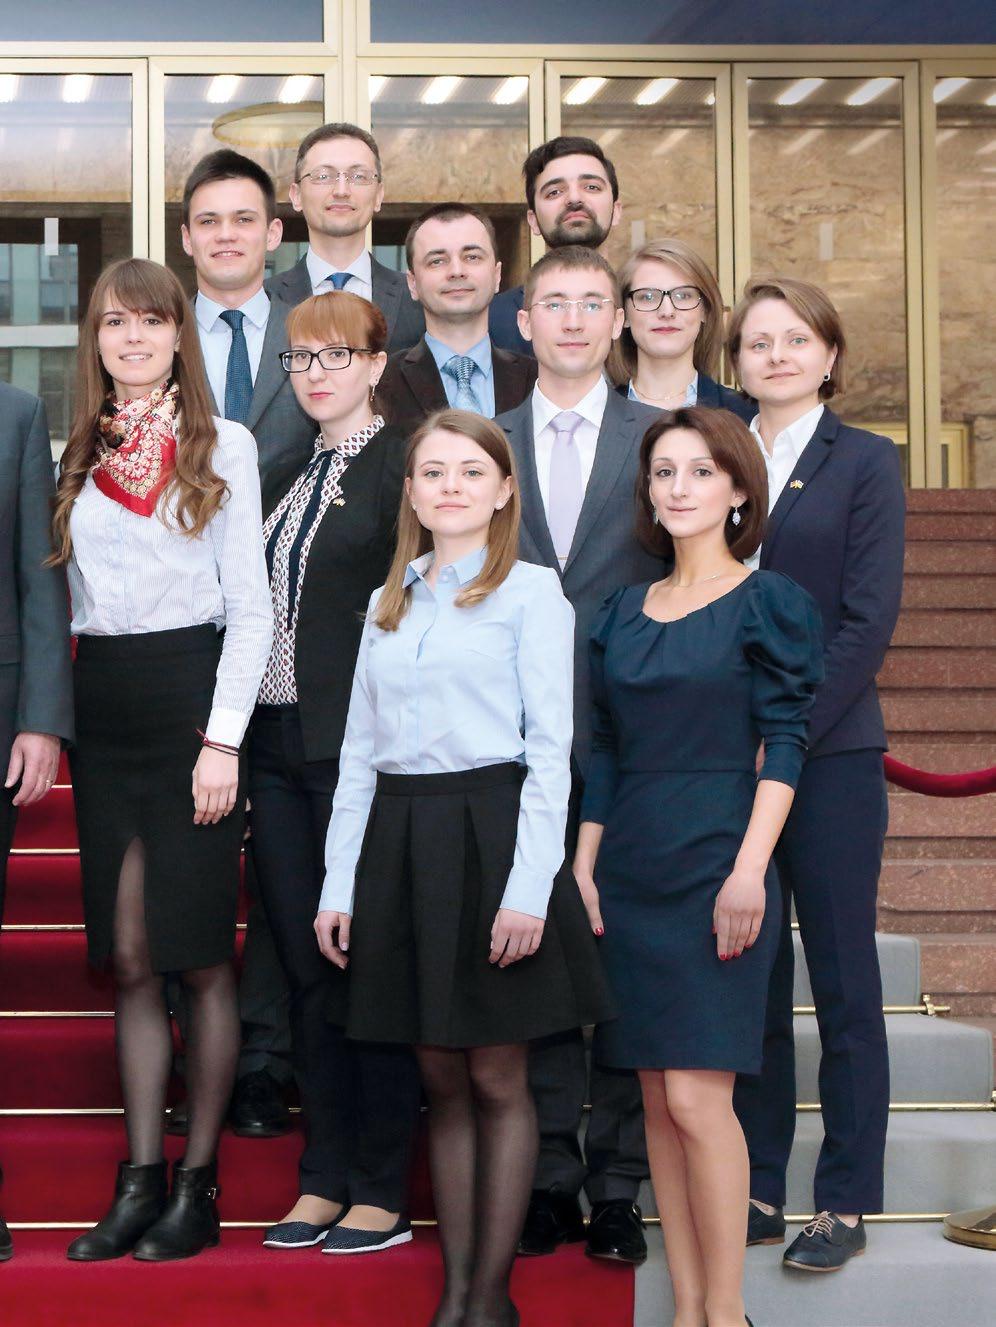 High Level Experts Programme Ukraine 23 High Level Experts Programme Ukraine 5 April 22 April 2016 1 st row, from left to right: Susanne Lada a (First Secretary at the Federal Foreign Office in